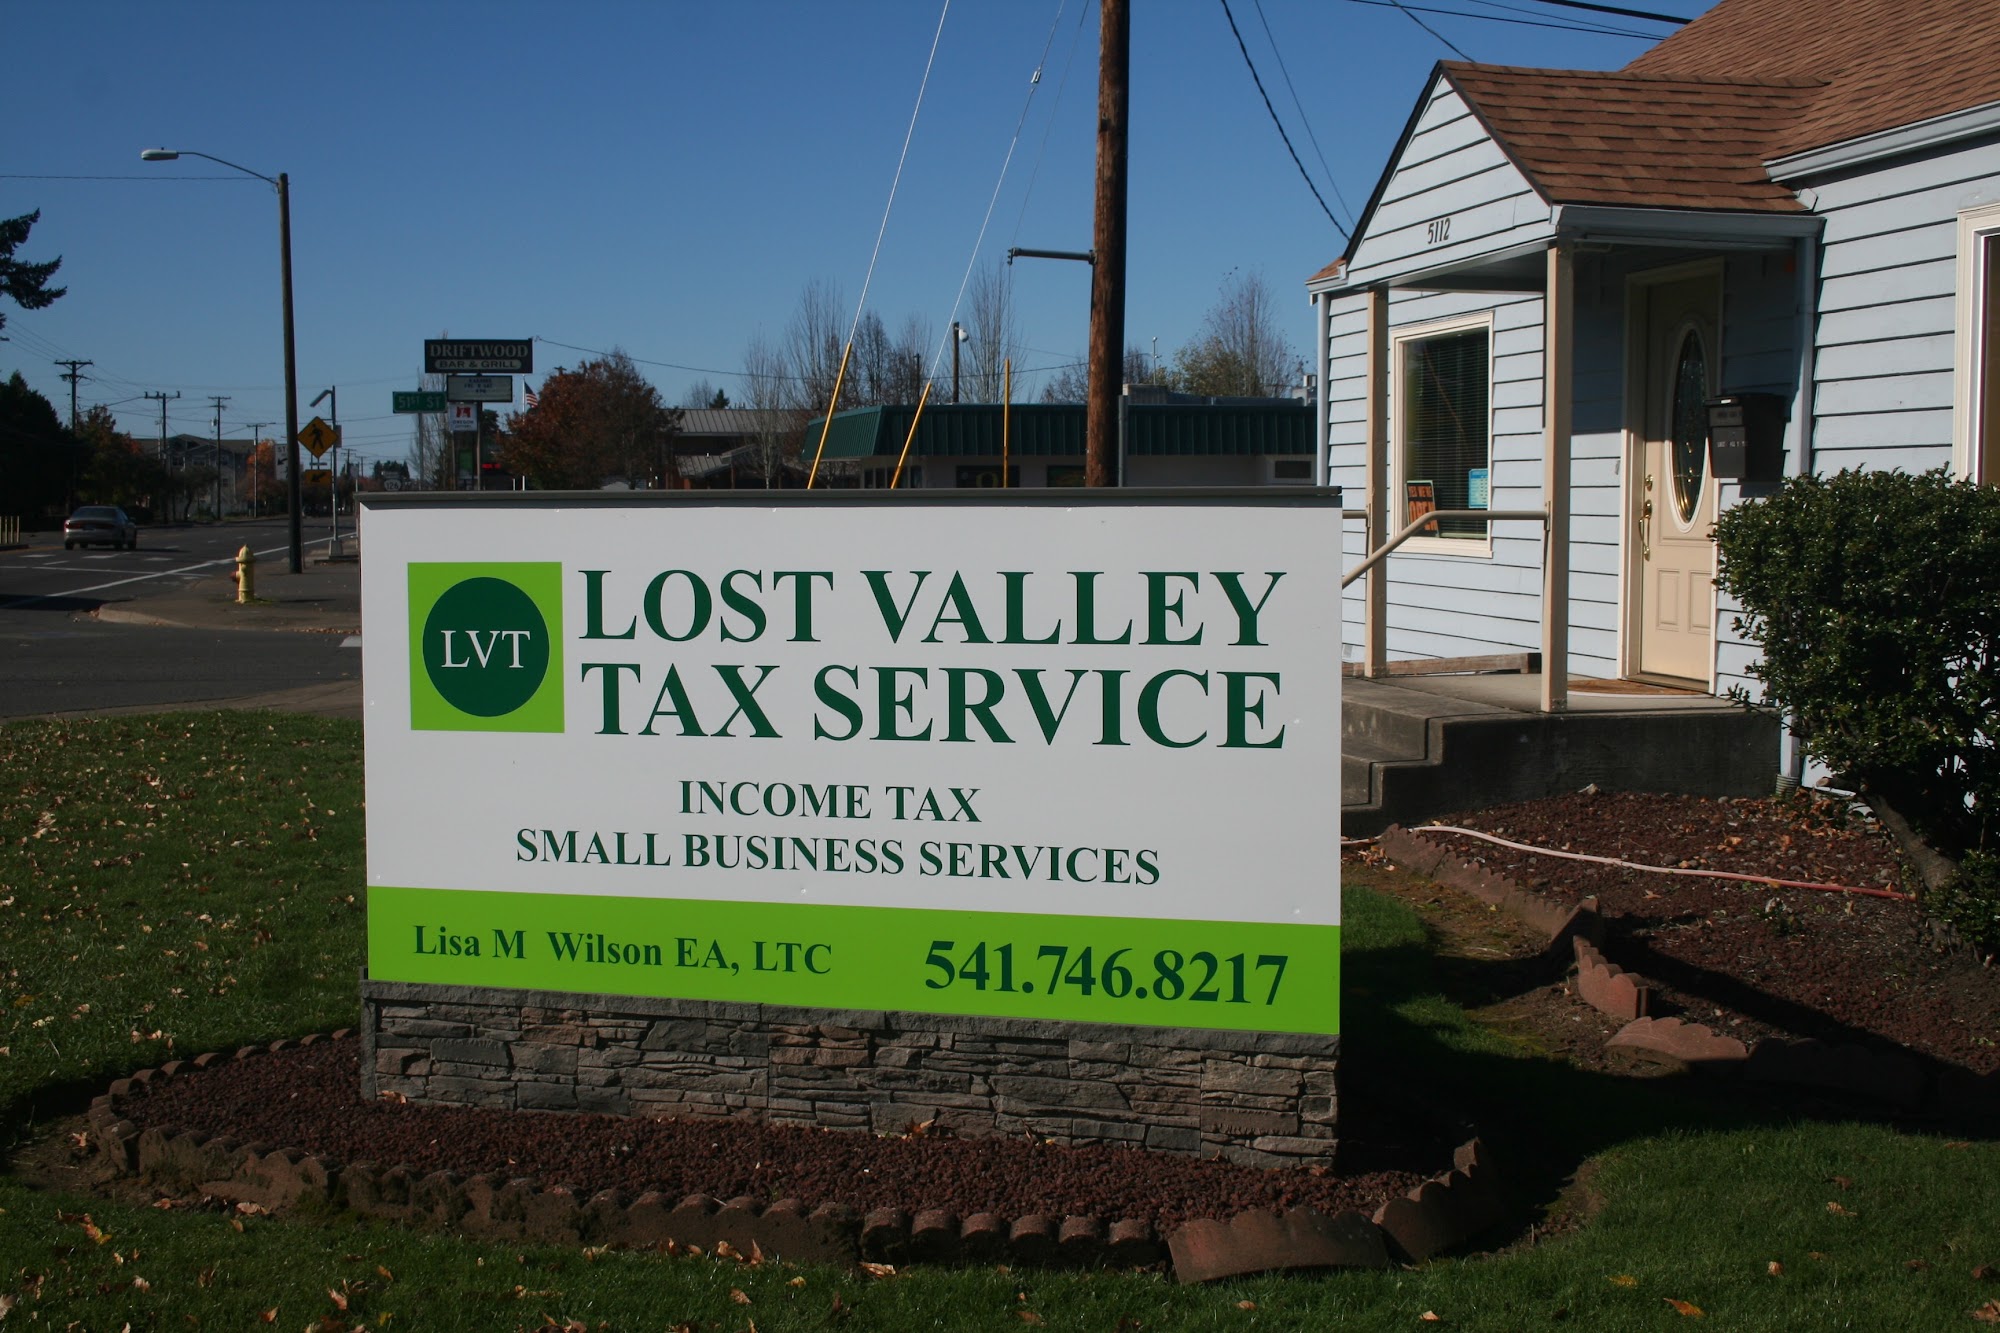 Lost Valley Tax Service